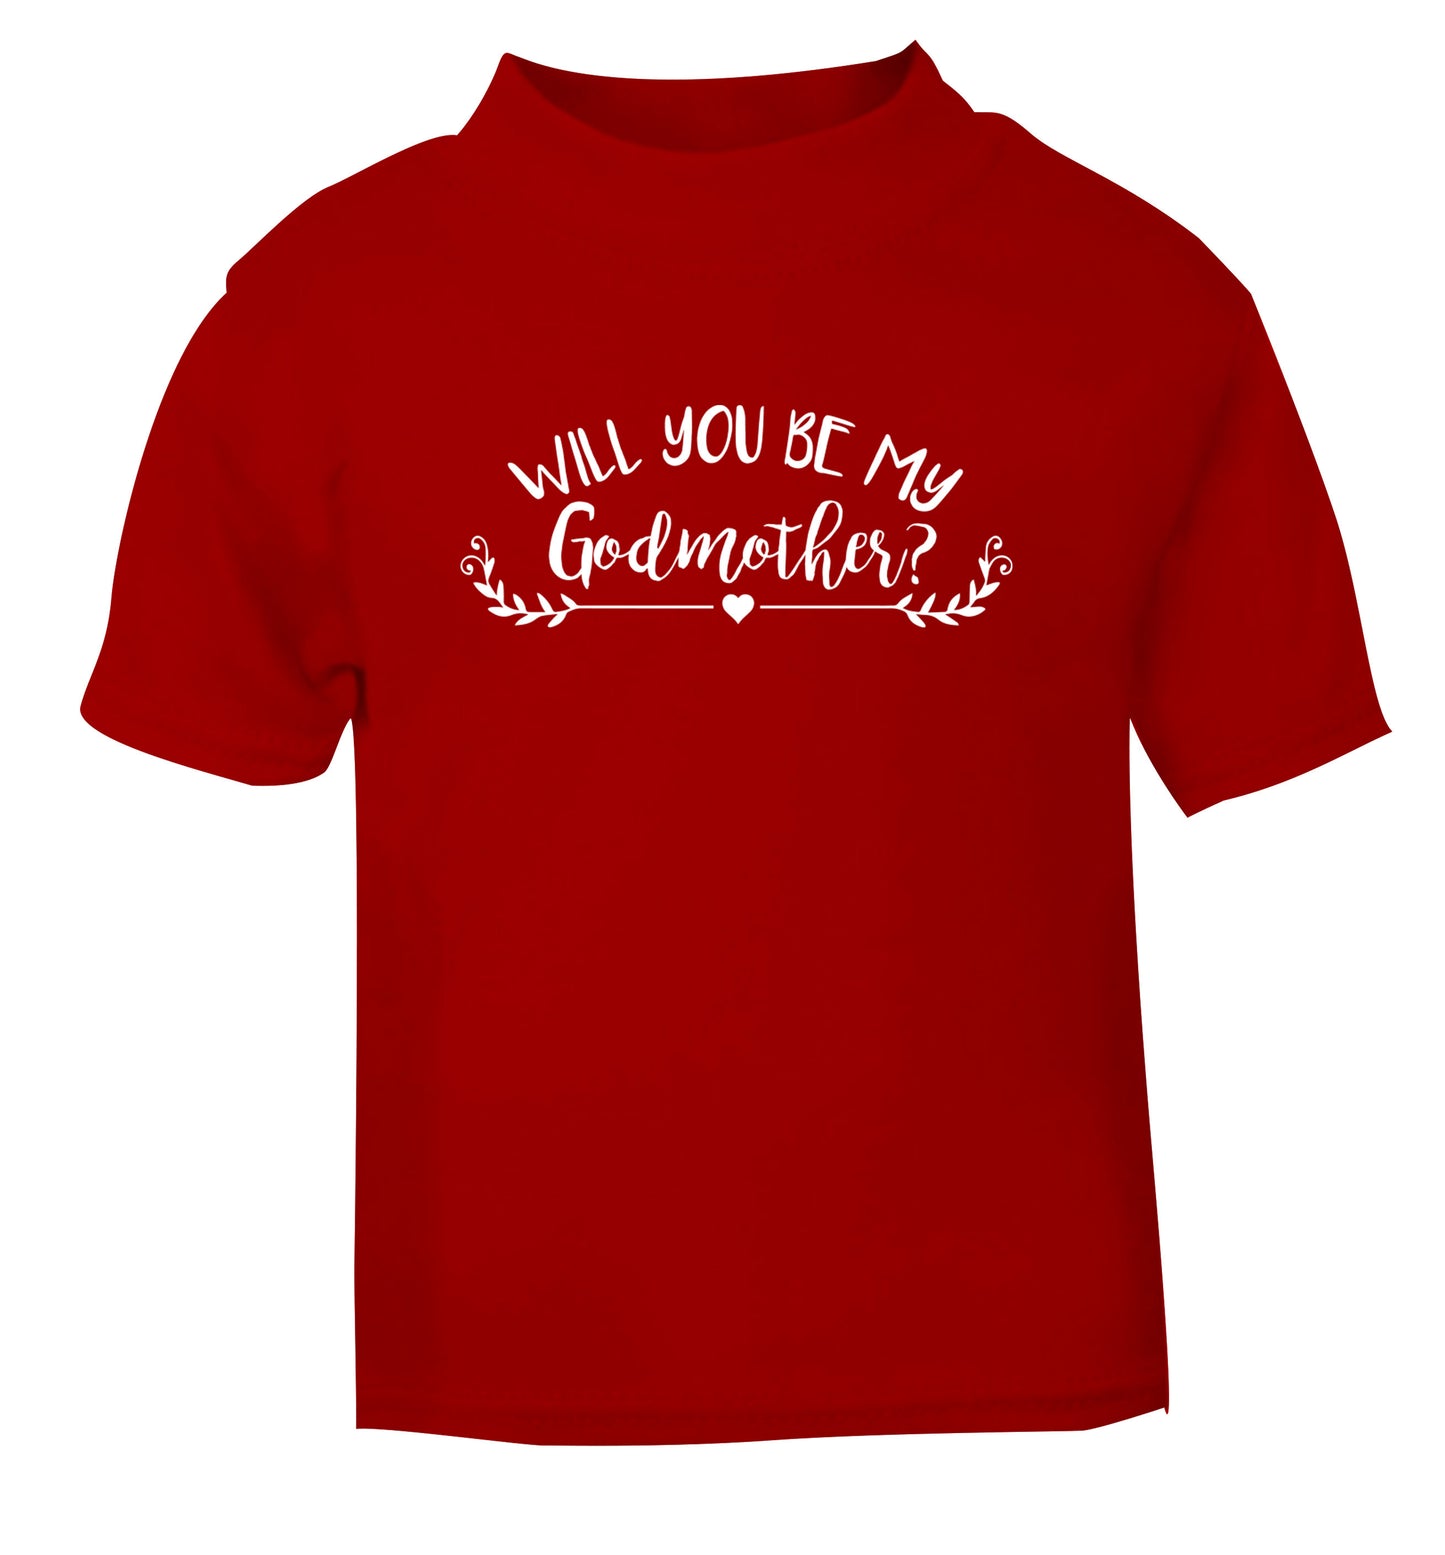 Will you be my godmother? red Baby Toddler Tshirt 2 Years